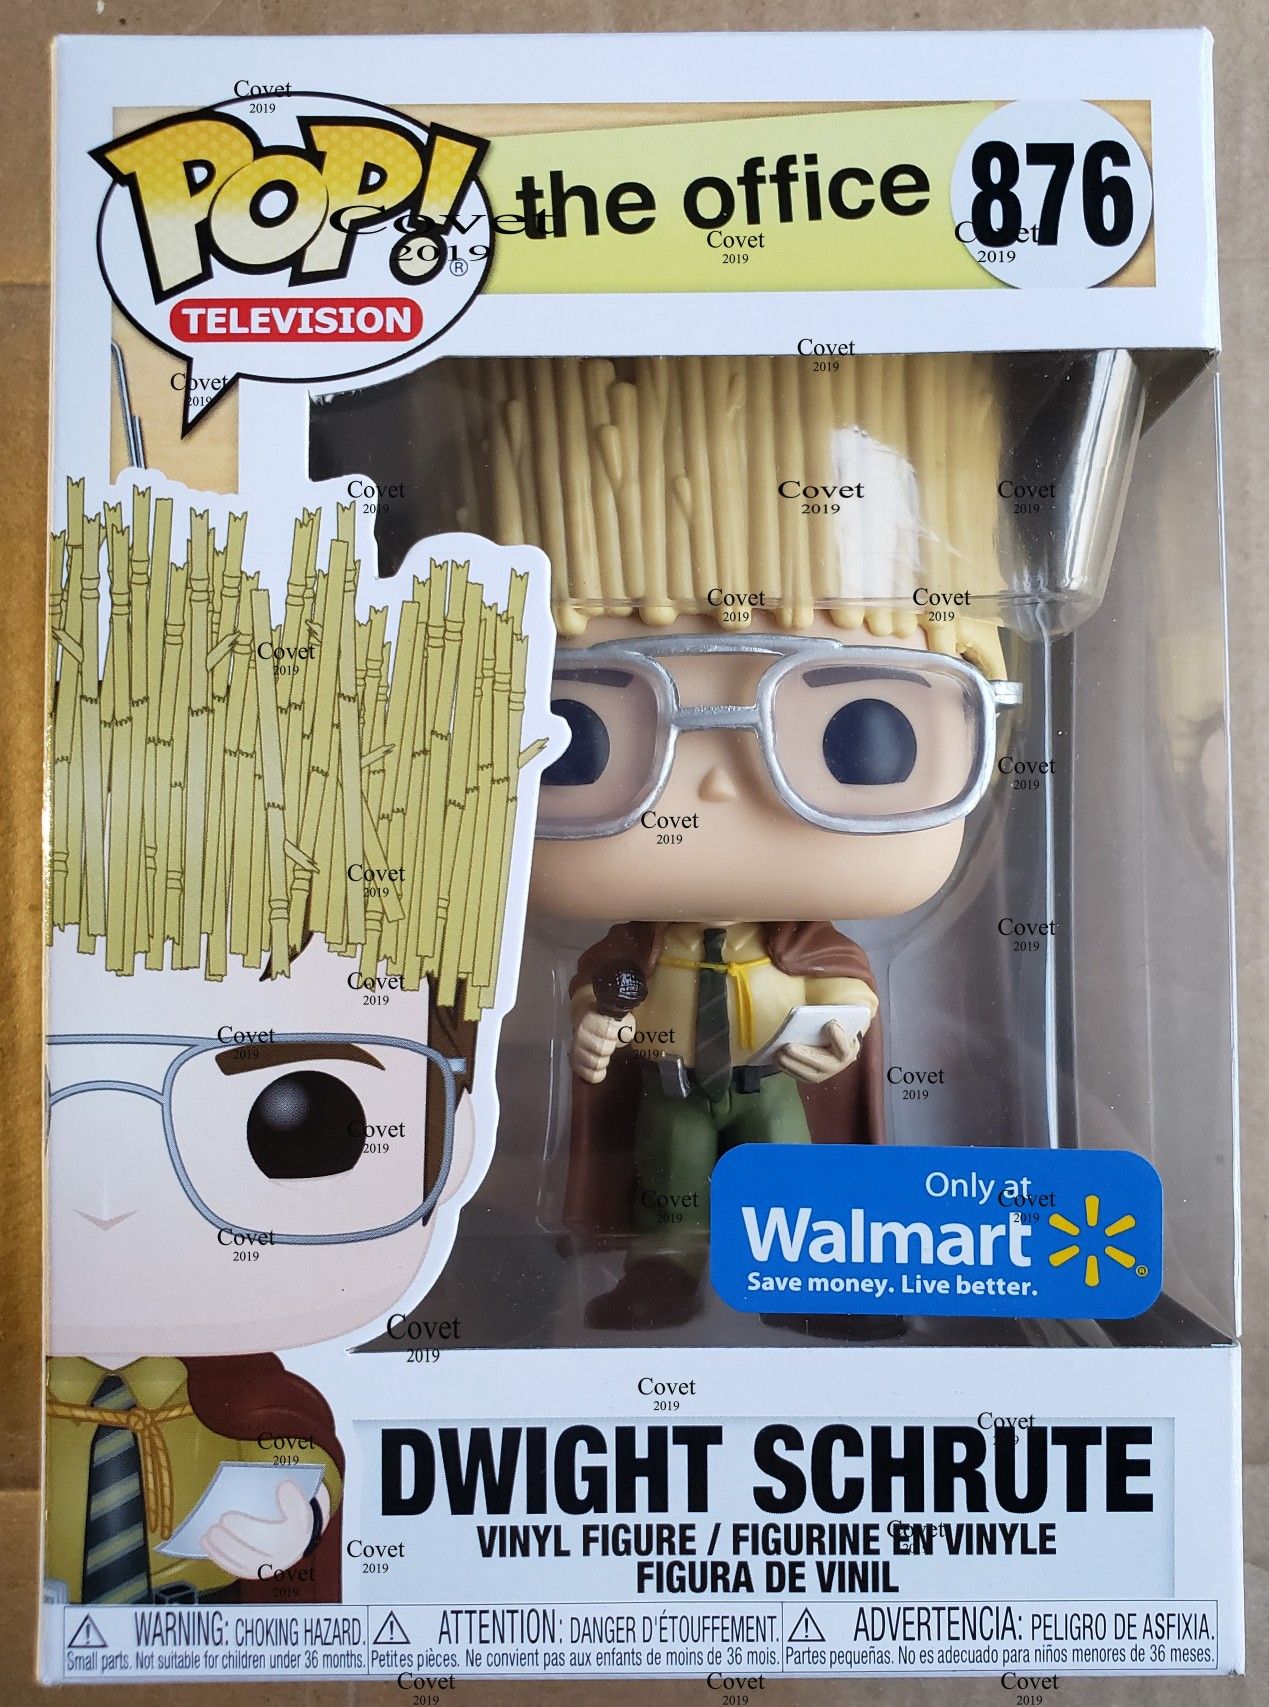 Funko Pop! Dwight Schrute as Hay King. EXCLUSIVE!